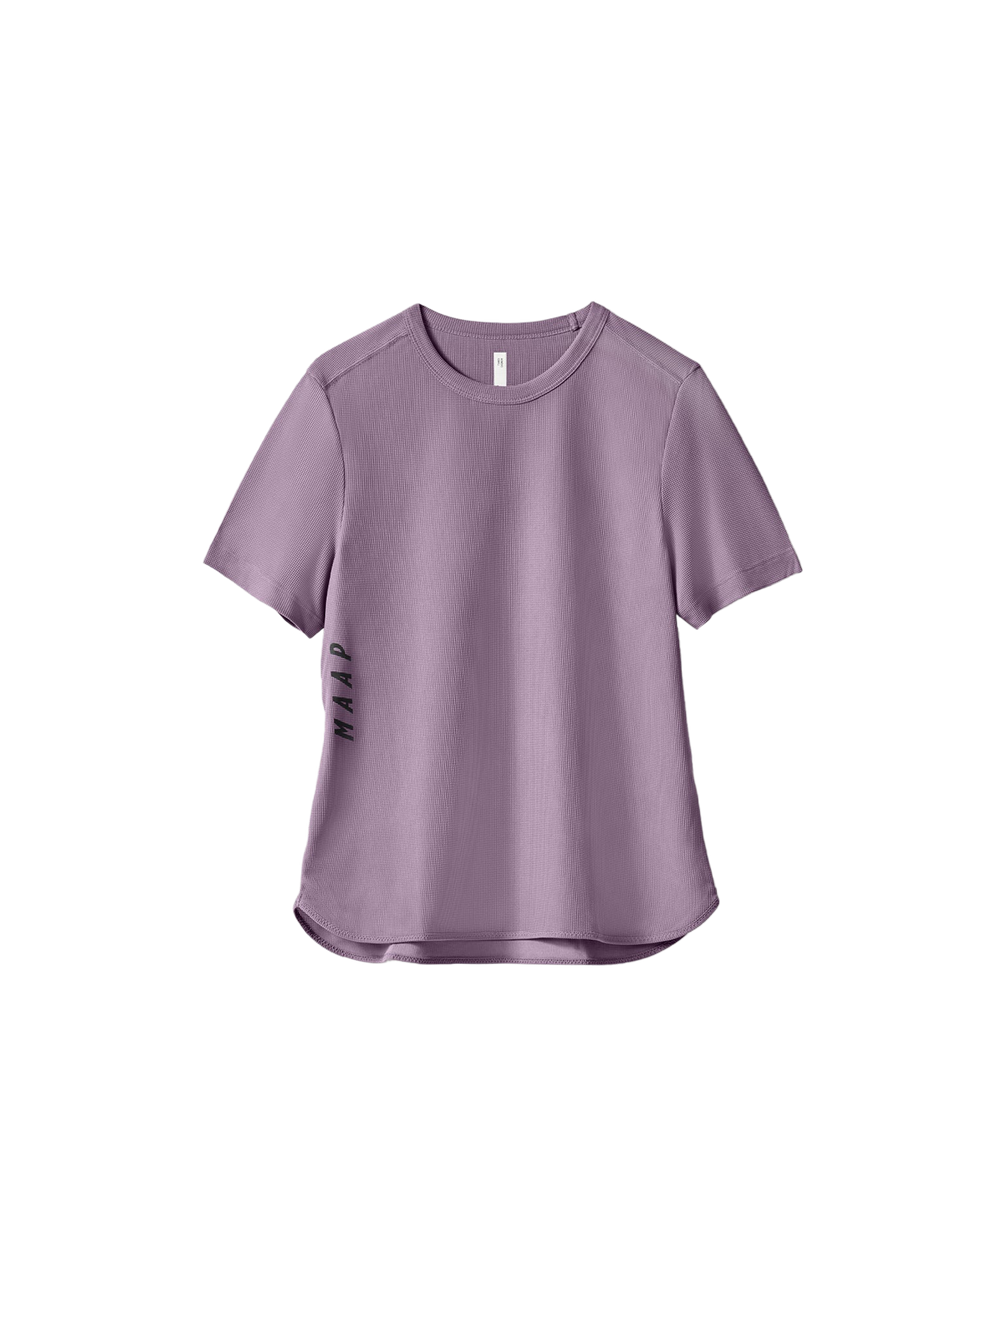 Product Image for Women's Alt_Road Ride Tee 2.0